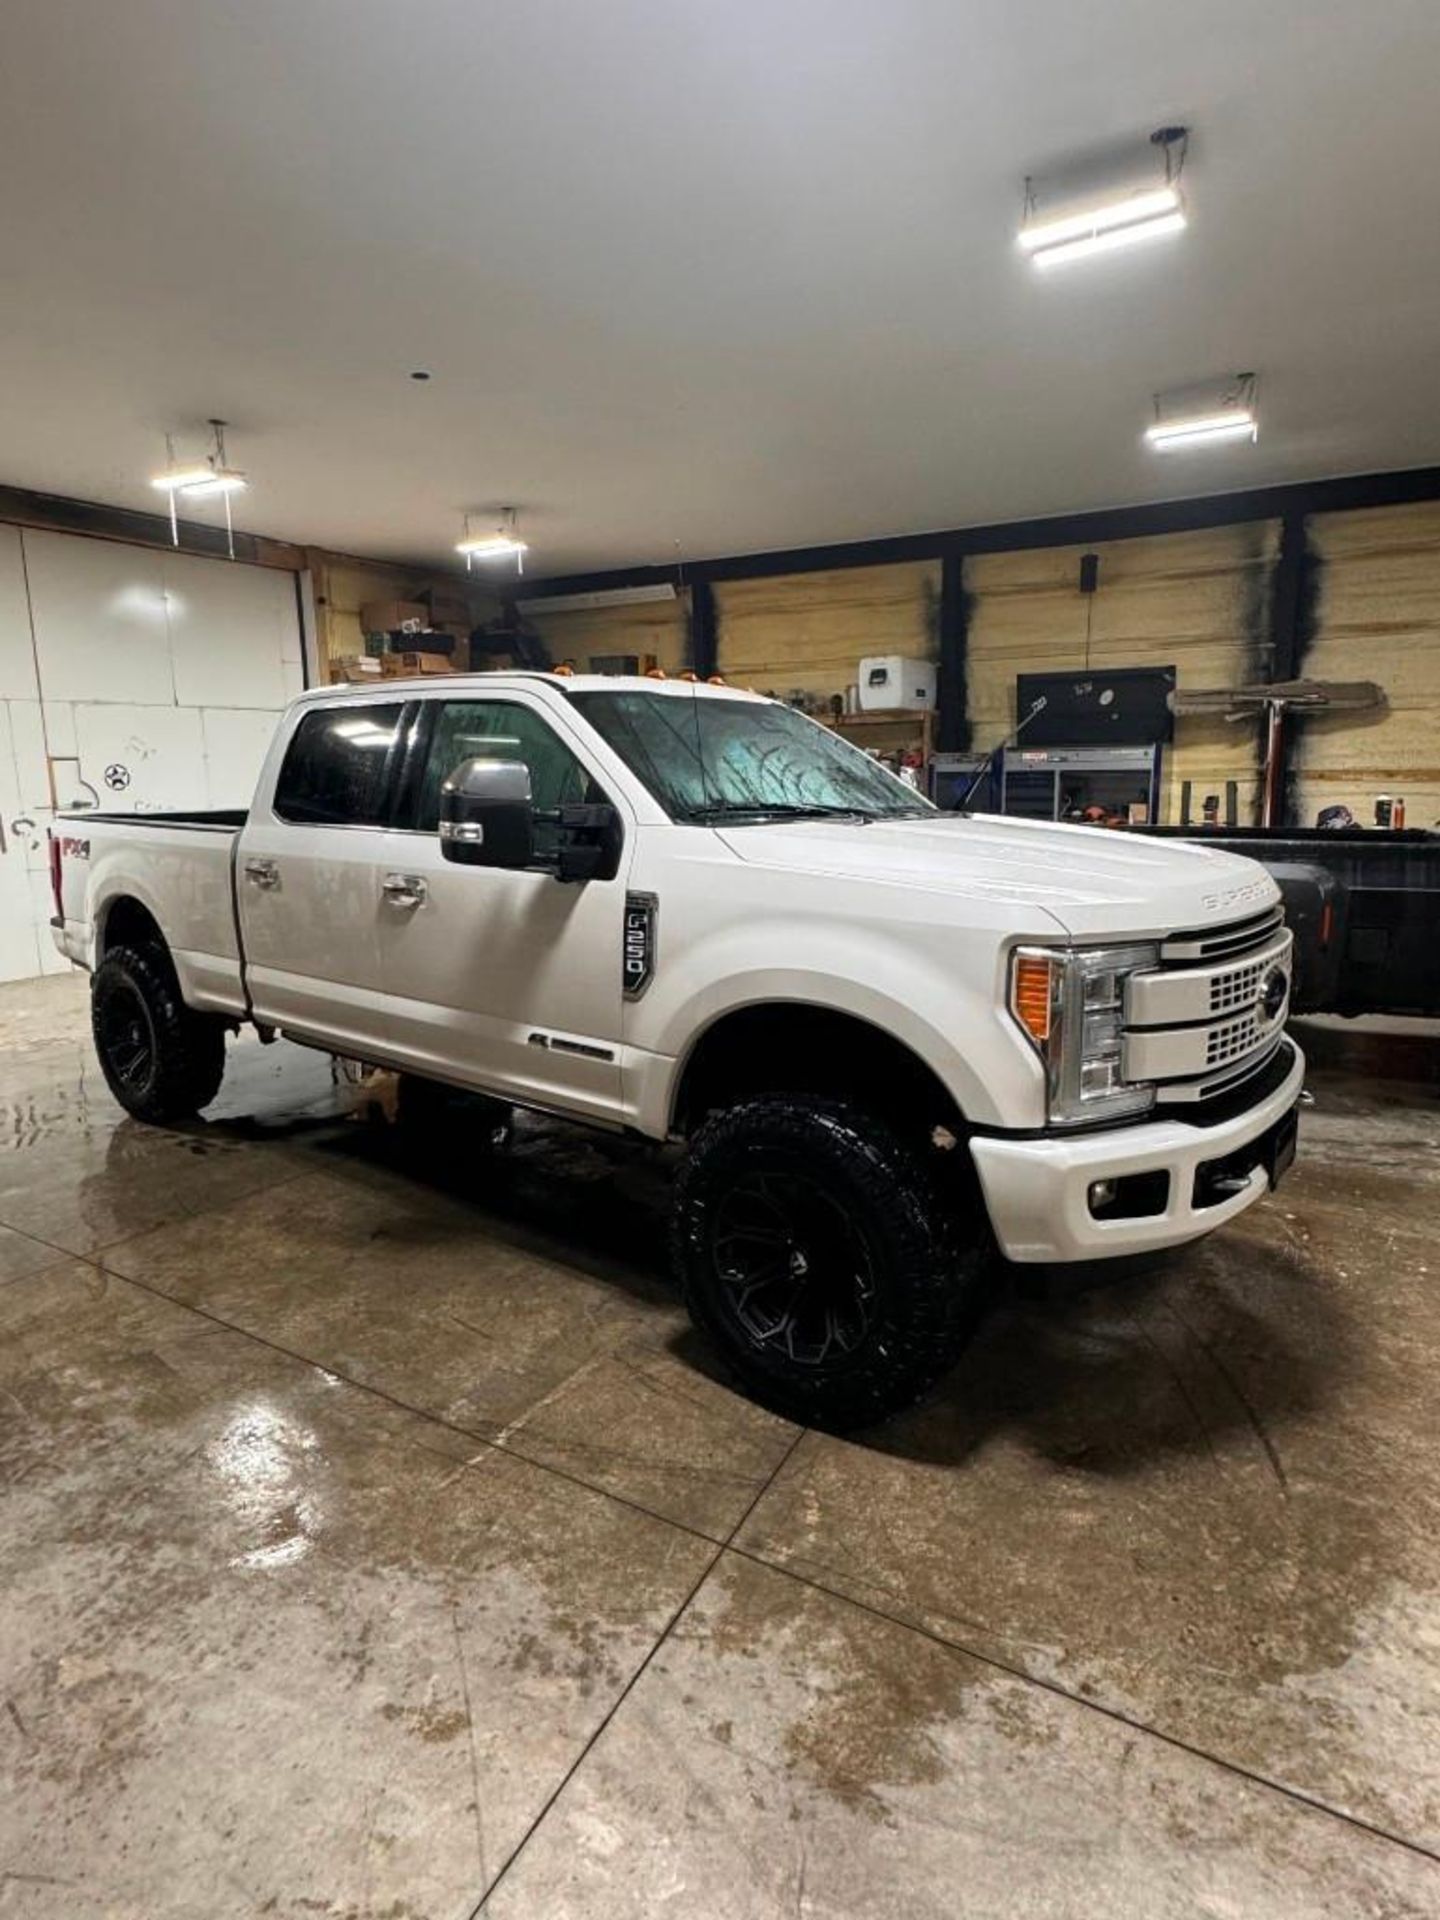 2017 Ford F-250 Pickup Truck (located off-site, please read description) - Image 5 of 17